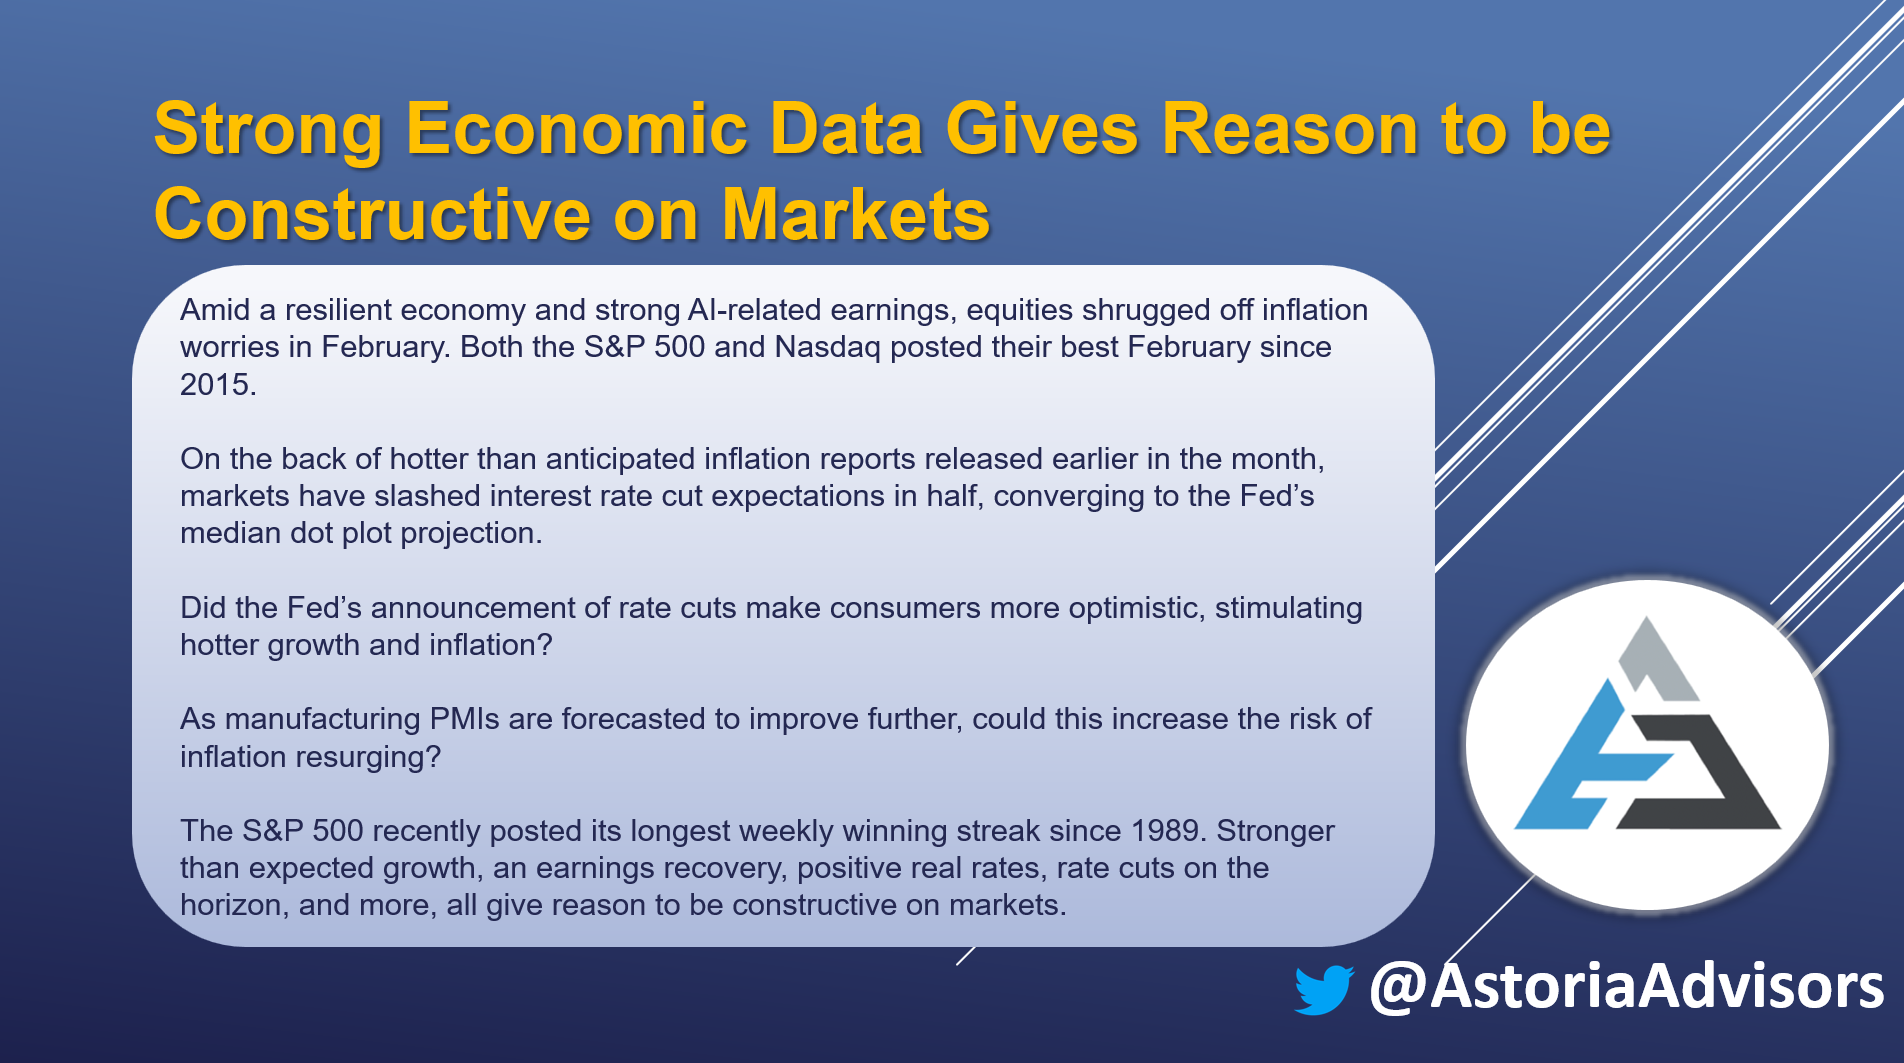 Strong Economic Data Gives Reason to be Constructive on Markets